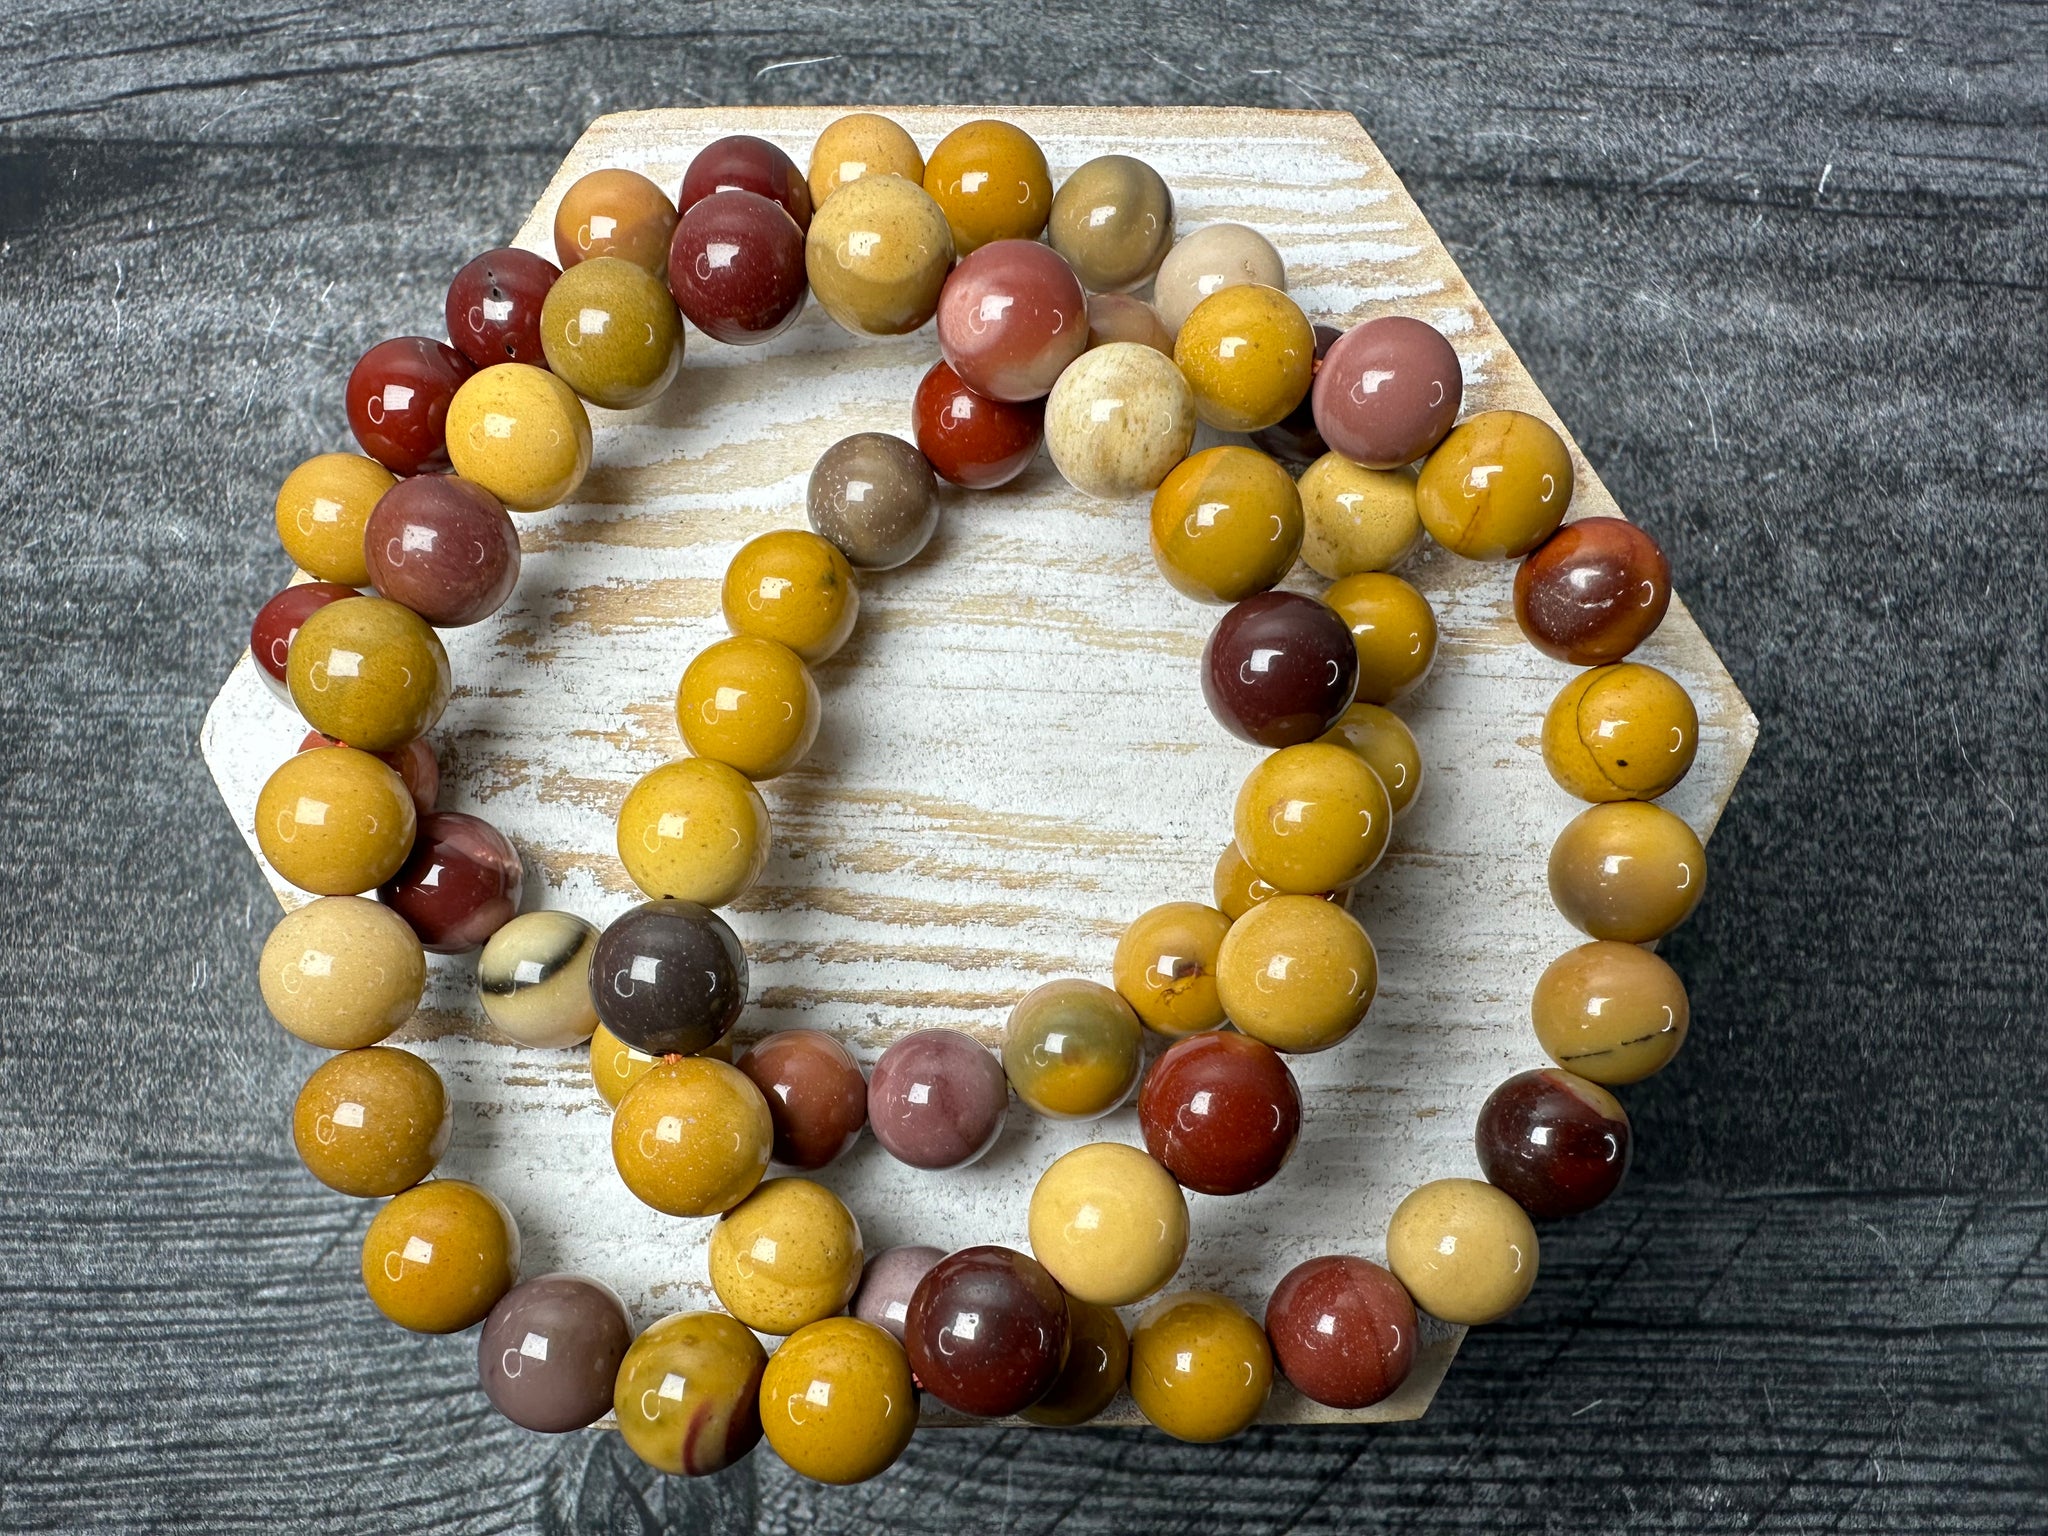 Amazing Mookaite Jasper bracelets ethically sourced from Australia!  Available in my shop: Mothernatureminerals.com 🛍 : r/Crystalsforsale